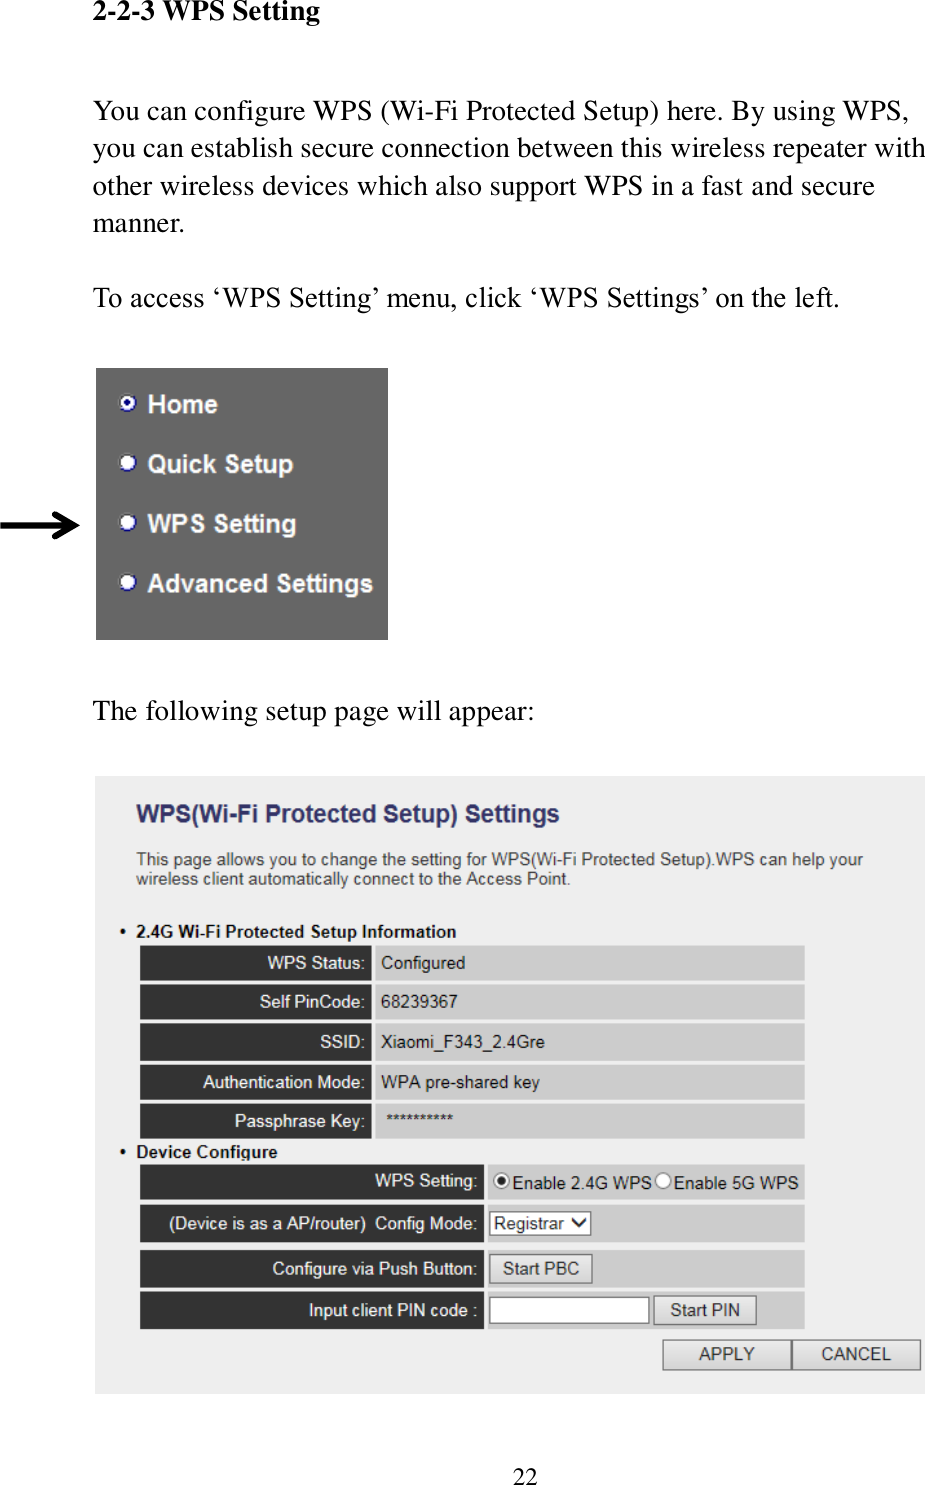 22 2-2-3 WPS Setting  You can configure WPS (Wi-Fi Protected Setup) here. By using WPS, you can establish secure connection between this wireless repeater with other wireless devices which also support WPS in a fast and secure manner.  To access ‘WPS Setting’ menu, click ‘WPS Settings’ on the left.    The following setup page will appear:    